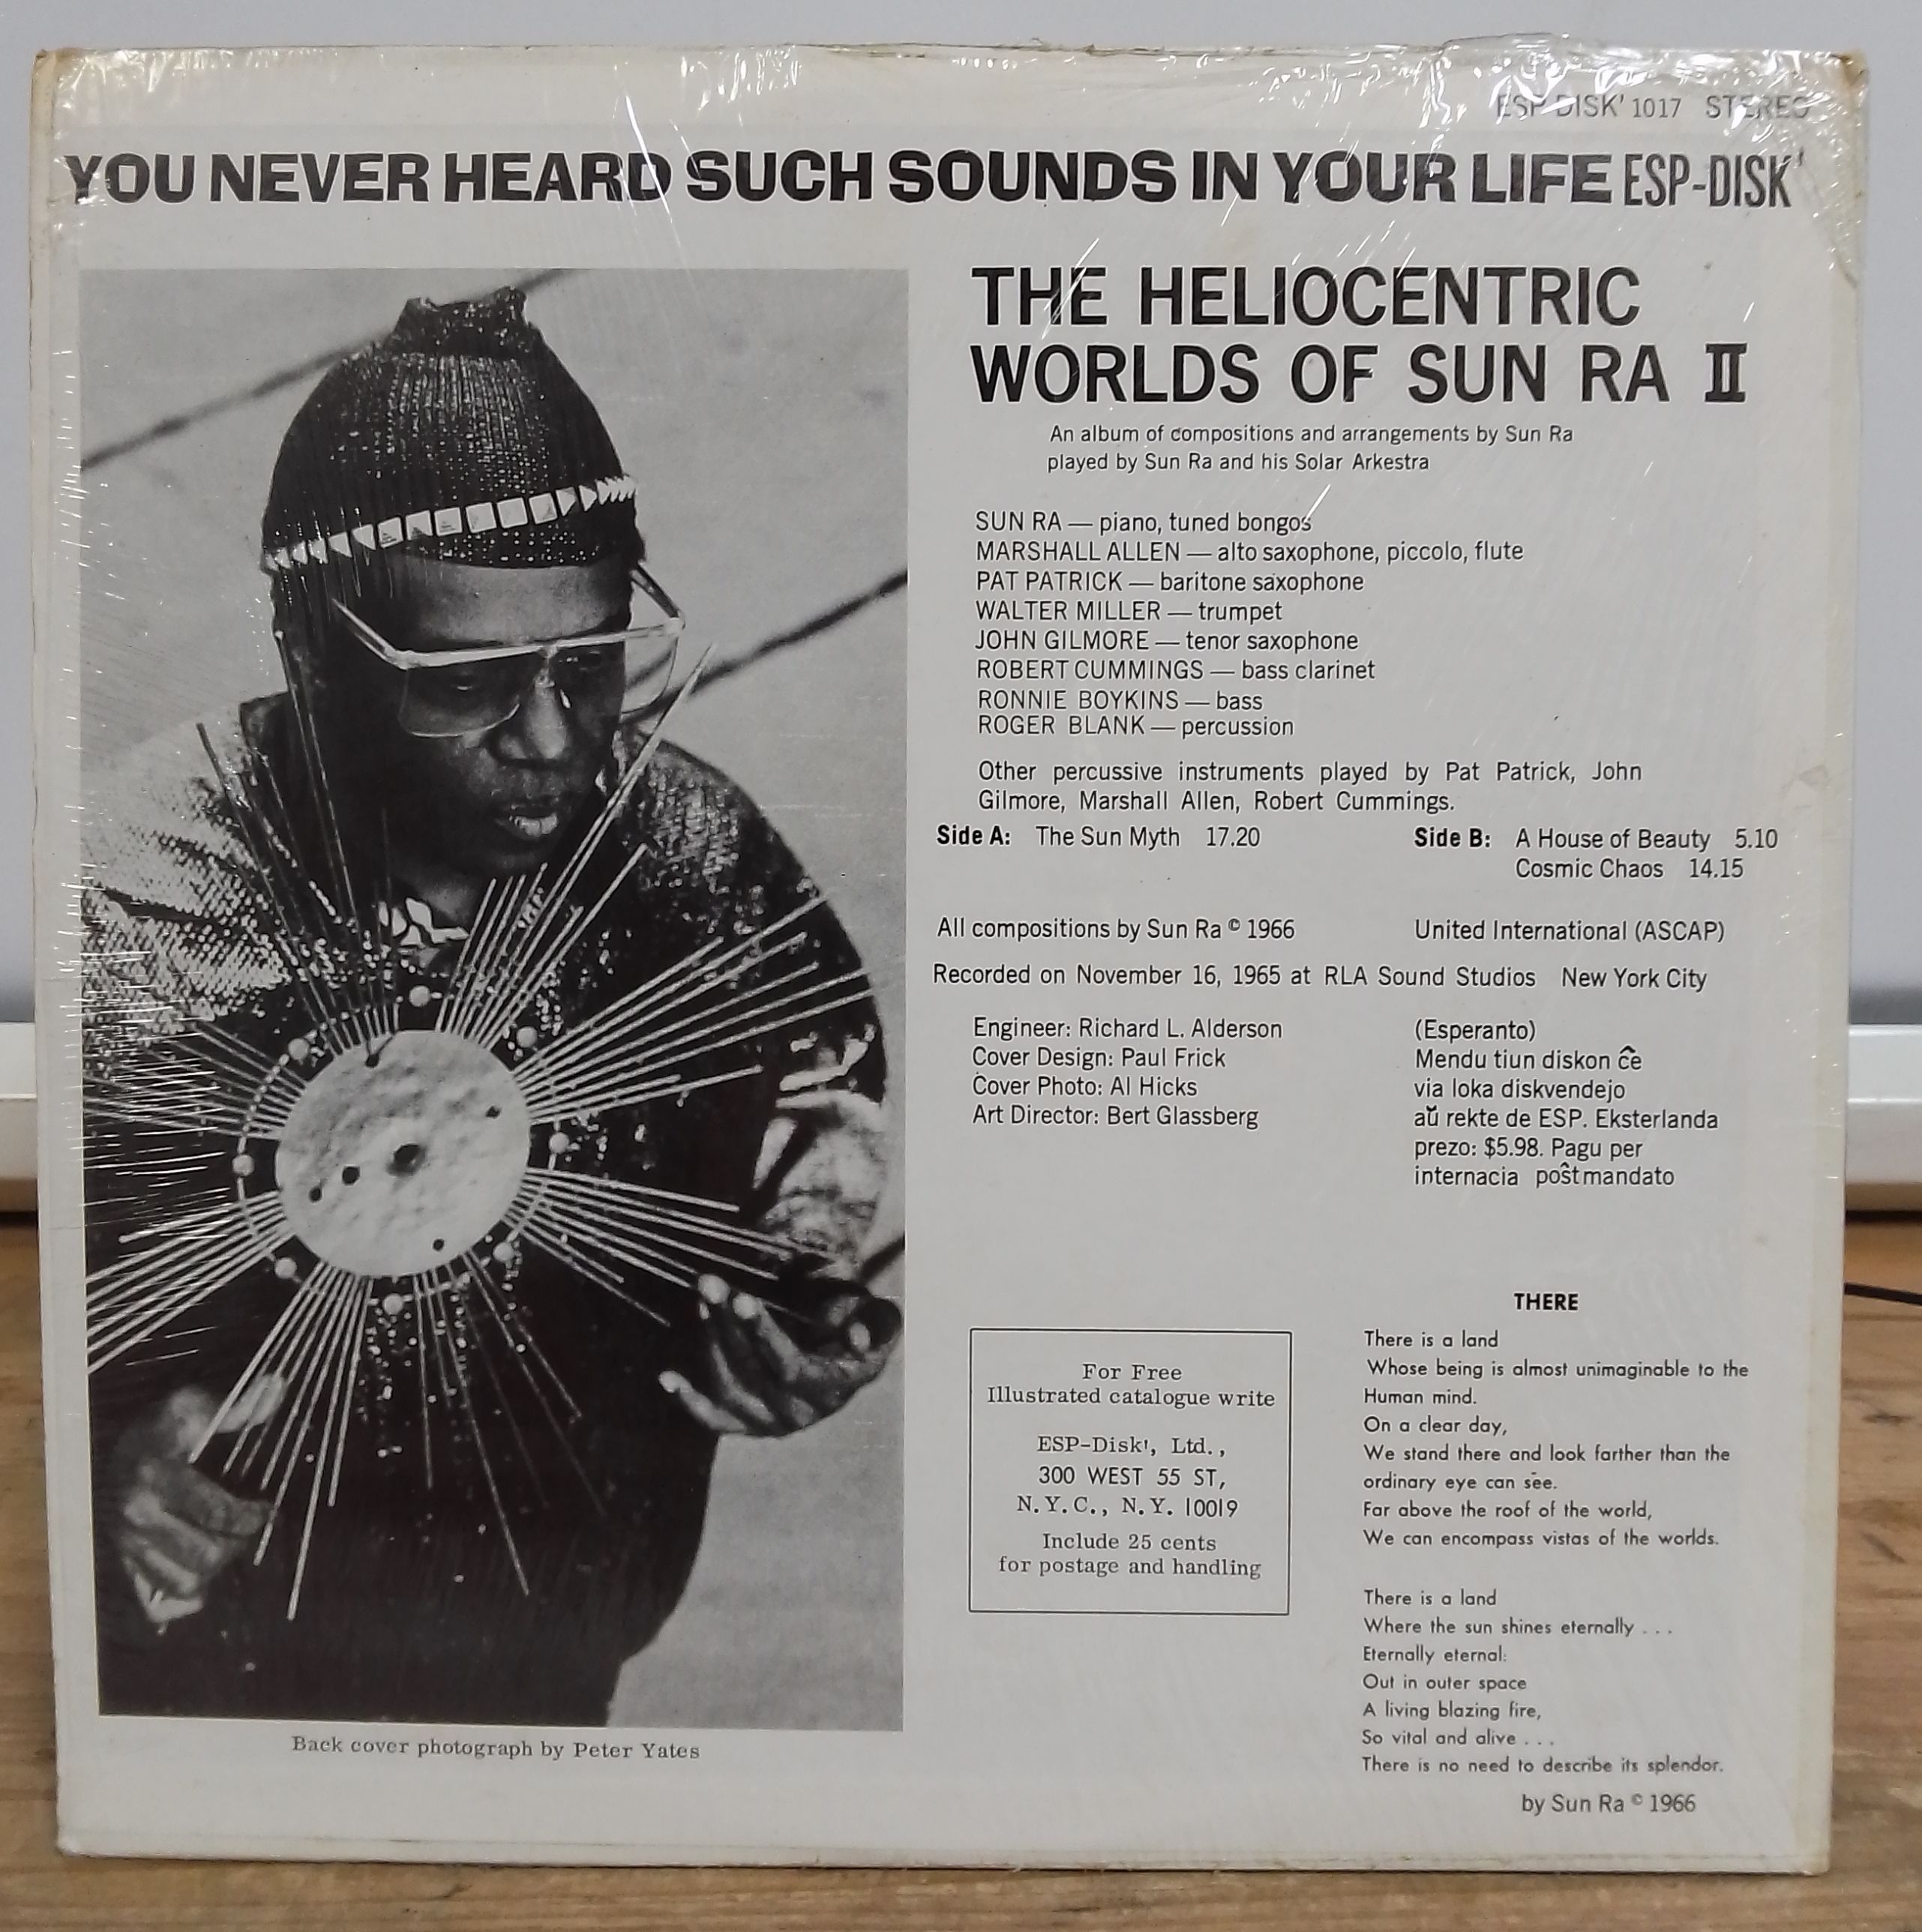 Two Sun Ra LPs: Astro Black, gatefold stereo LP, US 1973, Impulse AS-9255 and The Heliocentric - Image 8 of 8